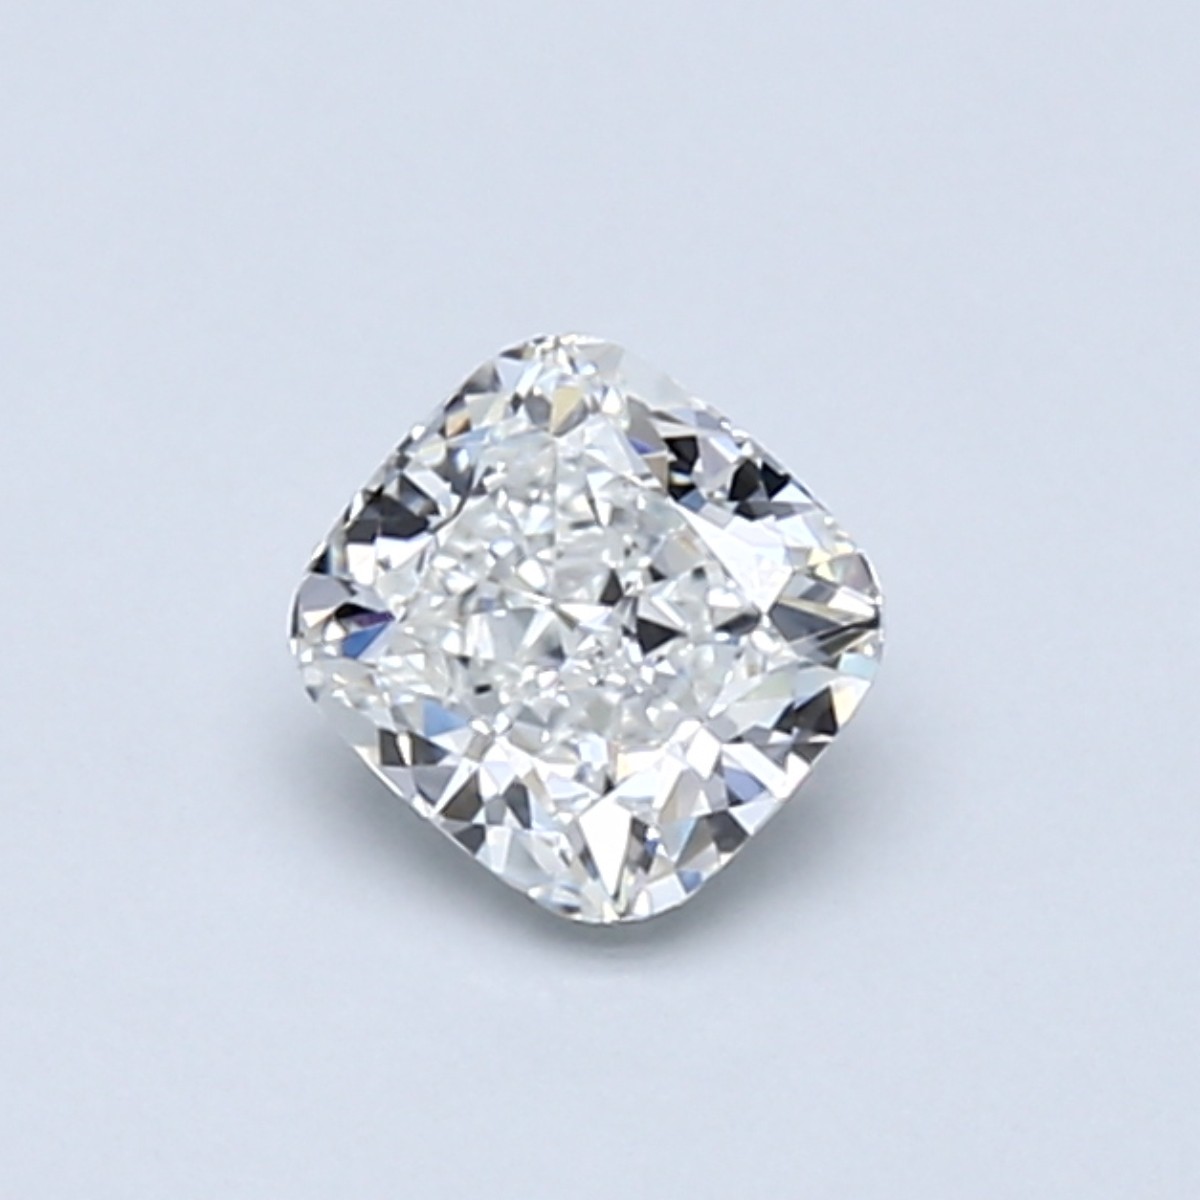 Cushion 0.57 Carat G Color VS2 Clarity For Sale